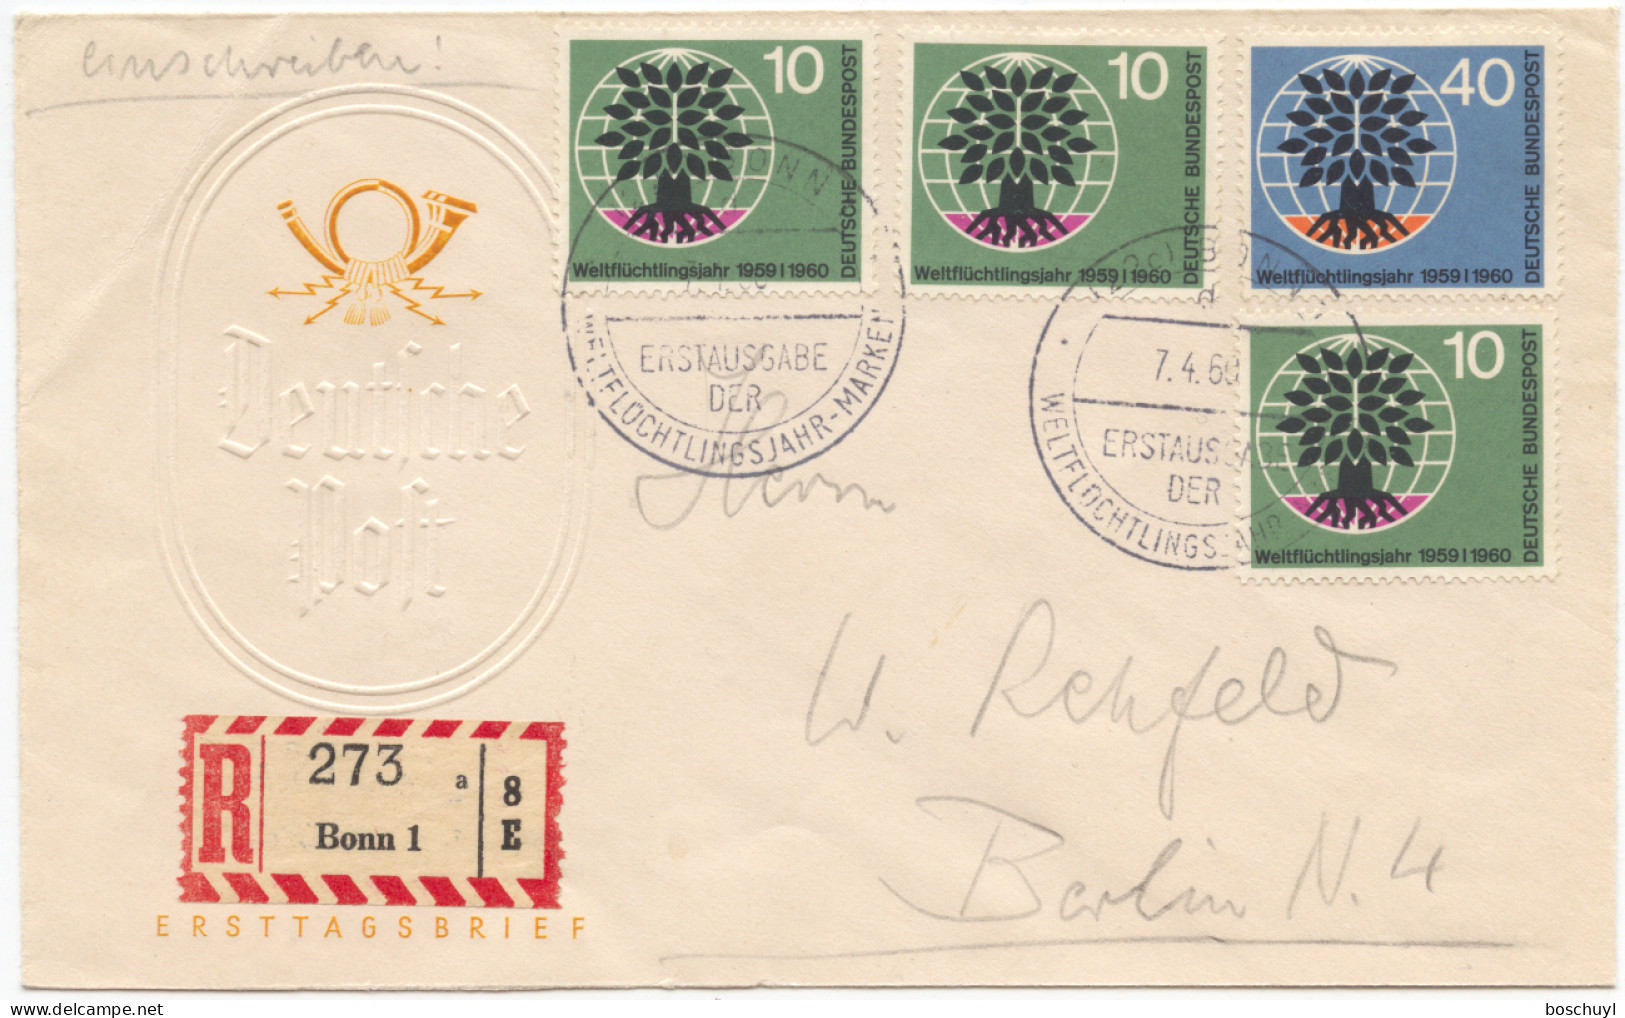 Germany, FRG, 1960, World Refugee Year, WRY, FDC Sent By Registered Mail, Michel 326-327 - Réfugiés